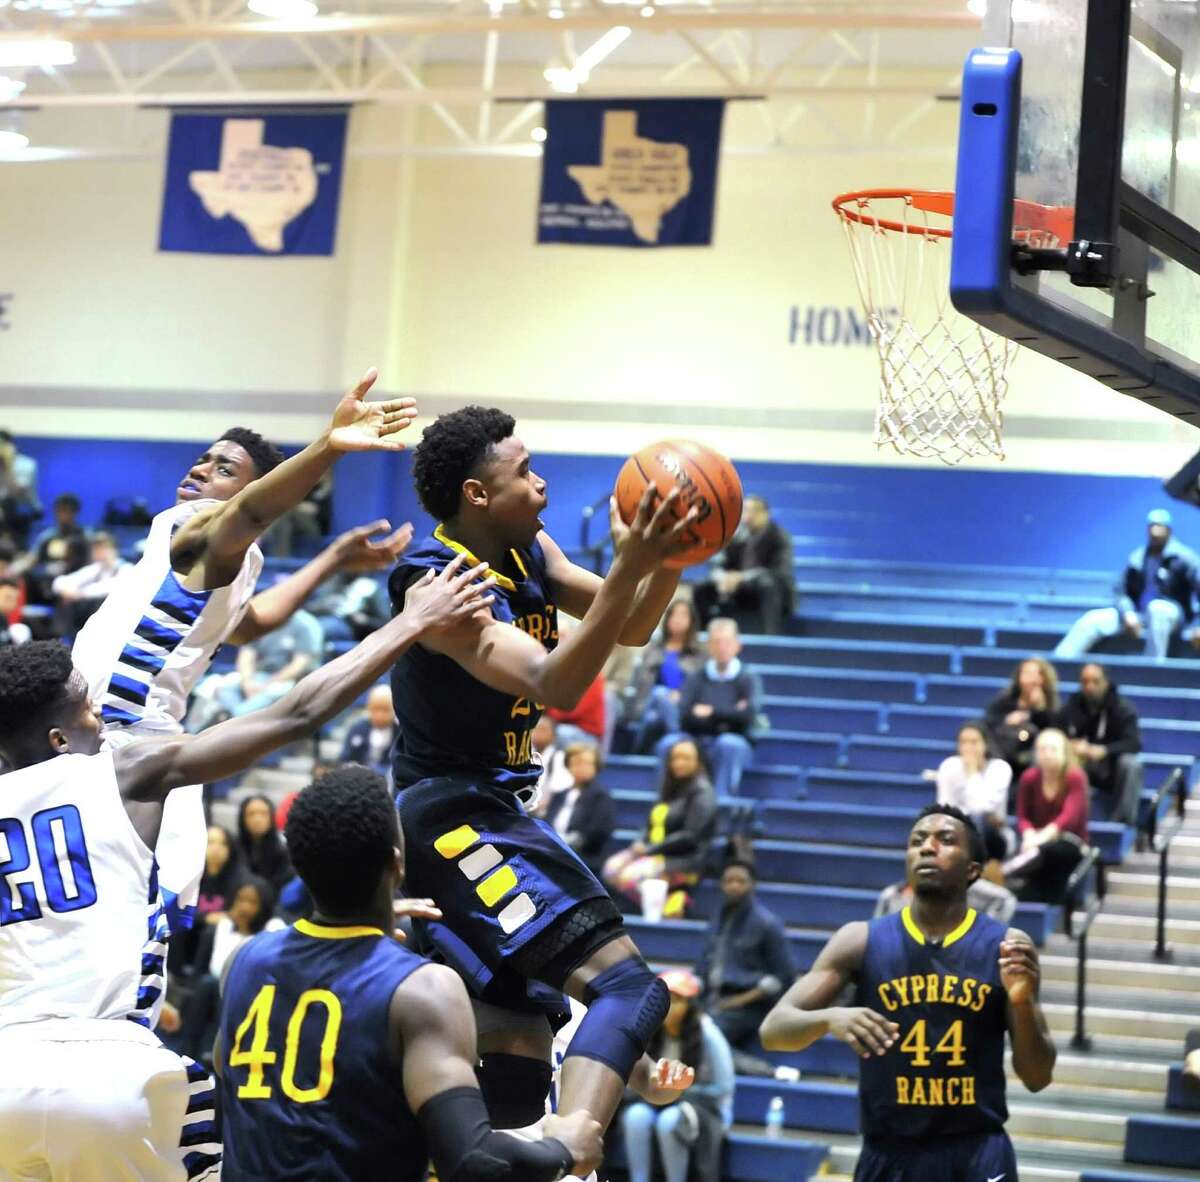 Cy Ranch and Cy Creek boys basketball teams played a game at the Cy Creek gym, 2-5-2016. Cy Ranch won the game, 56-43. Cy Ranch guard Michael Tate (23) scored on a layup in the third quarter against Cy Creek.